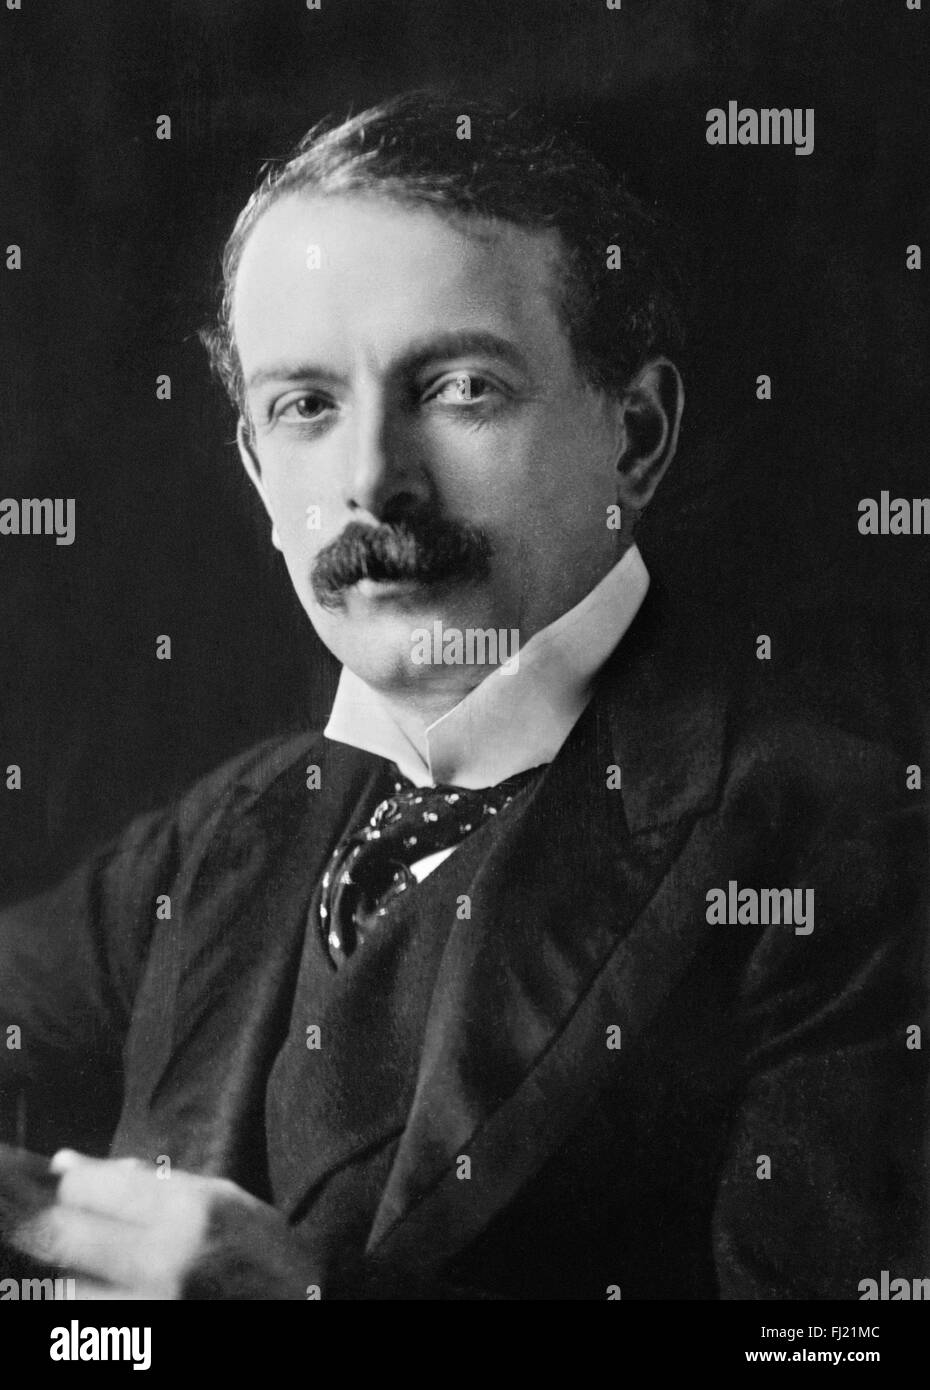 David Lloyd George, liberal politician who was British Prime Minister during and immediately after the First World War. Date of photograph unknown, but shows Lloyd George as a younger man Stock Photo